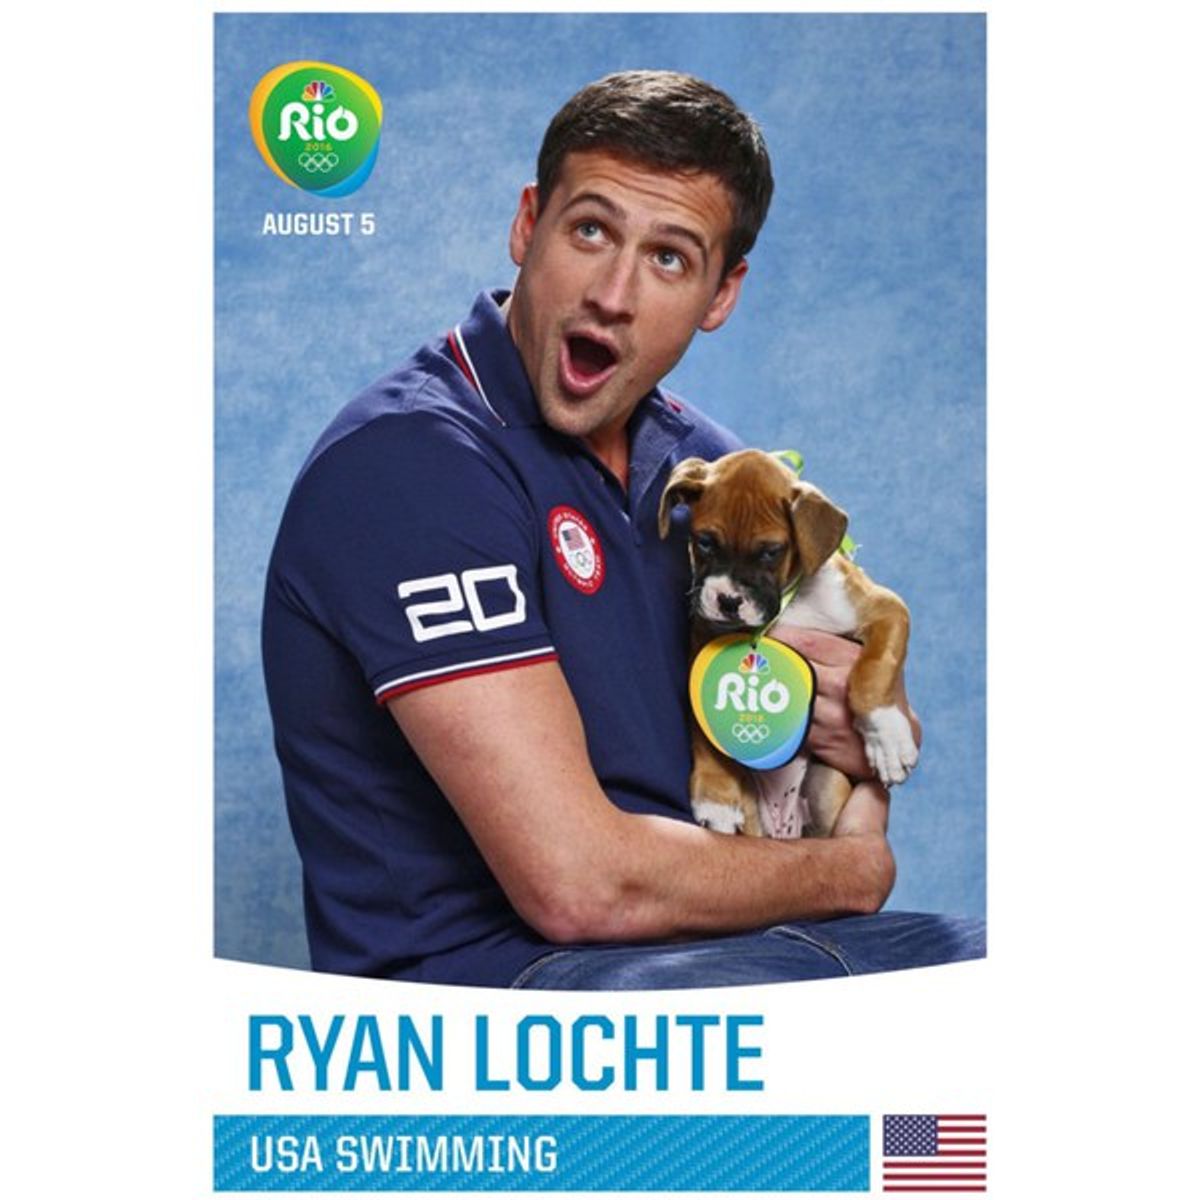 29 People Who Deserve The Attention We've Been Giving To Ryan Lochte